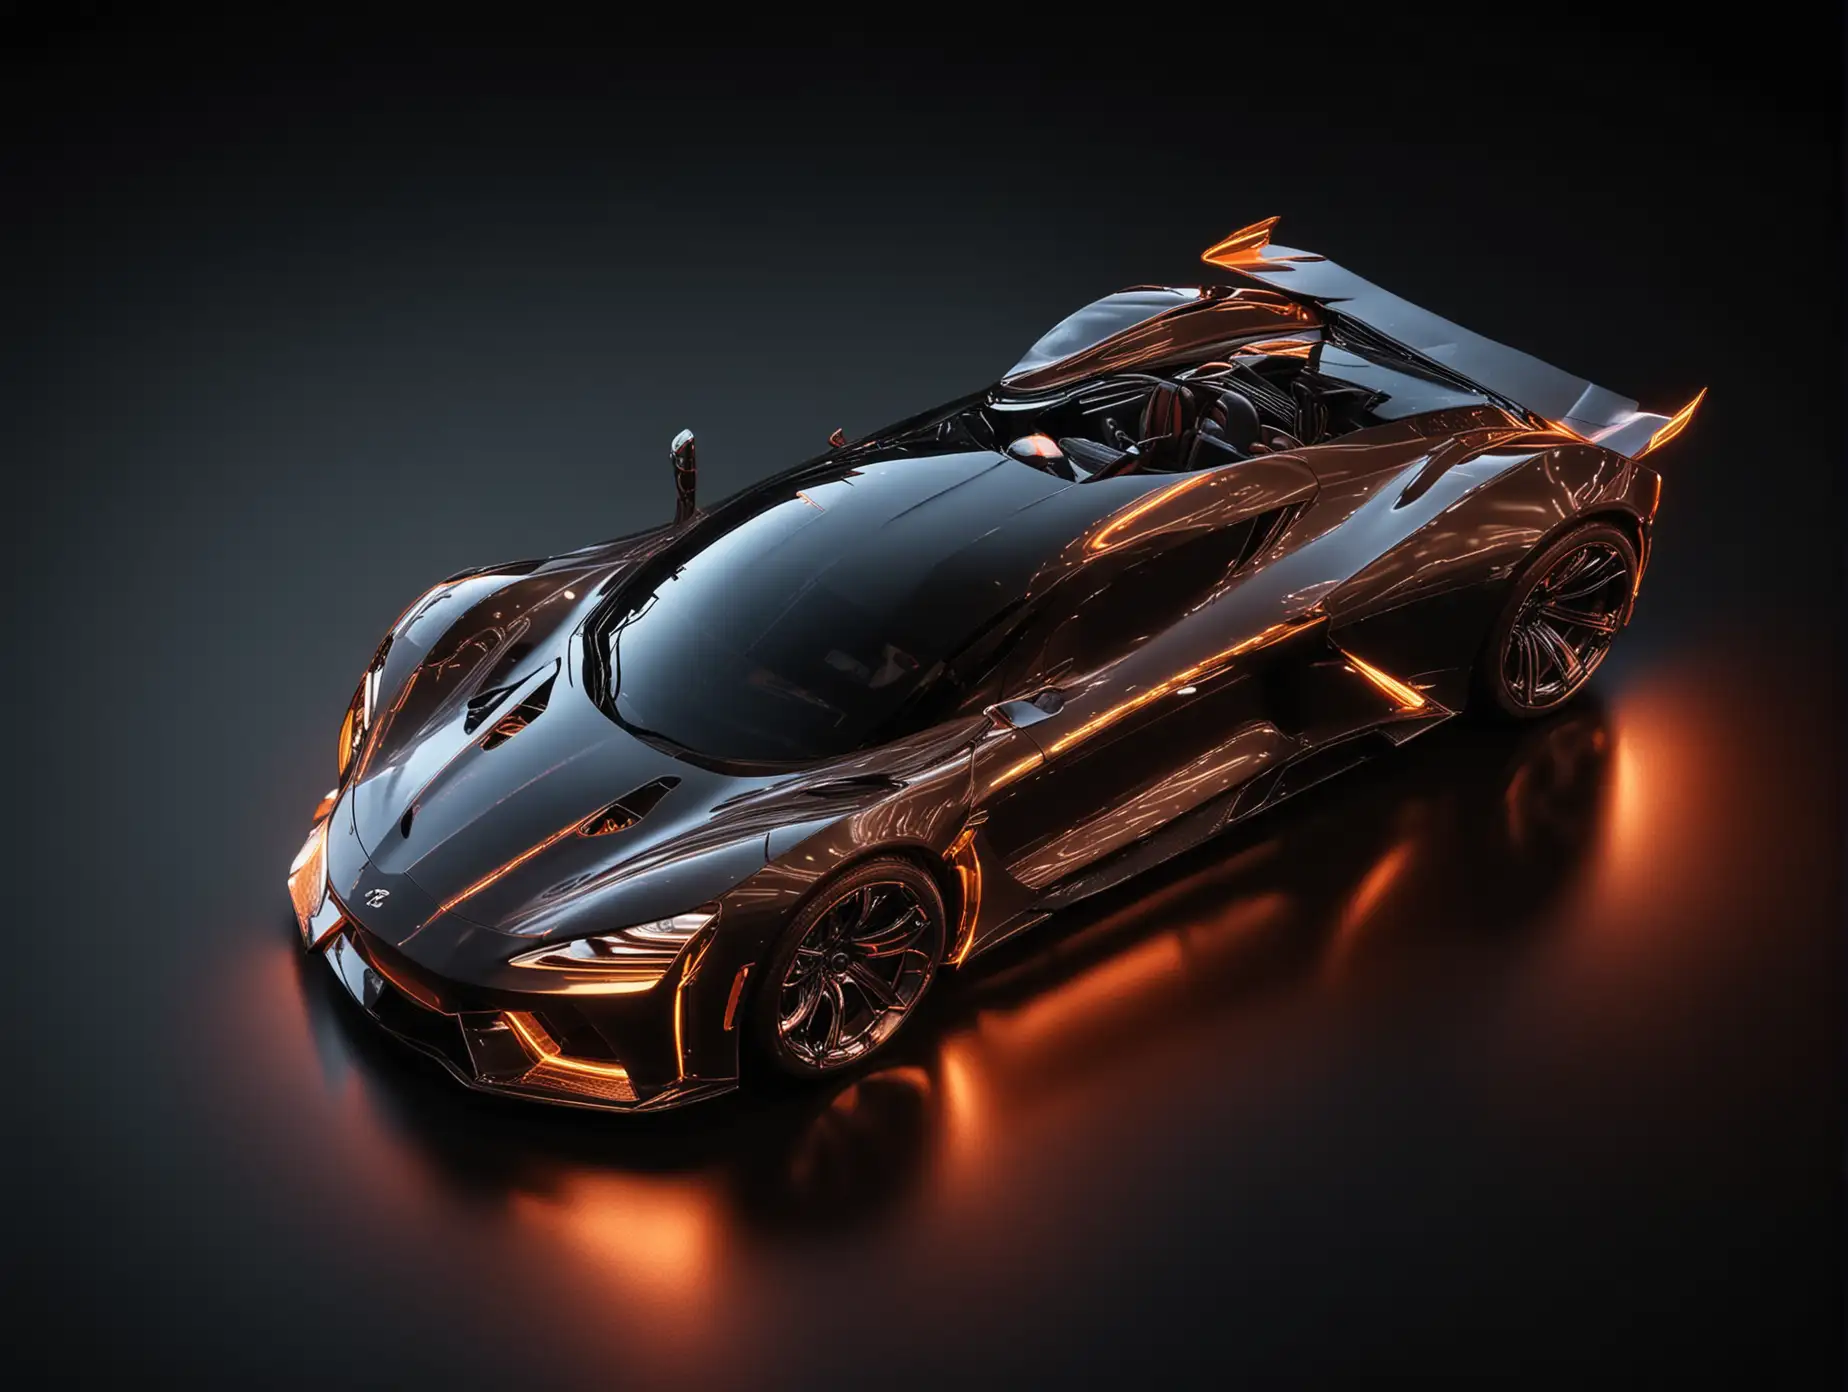 luxury futuristic sports car in vibrant colors on a black background, lit from above by several lamps